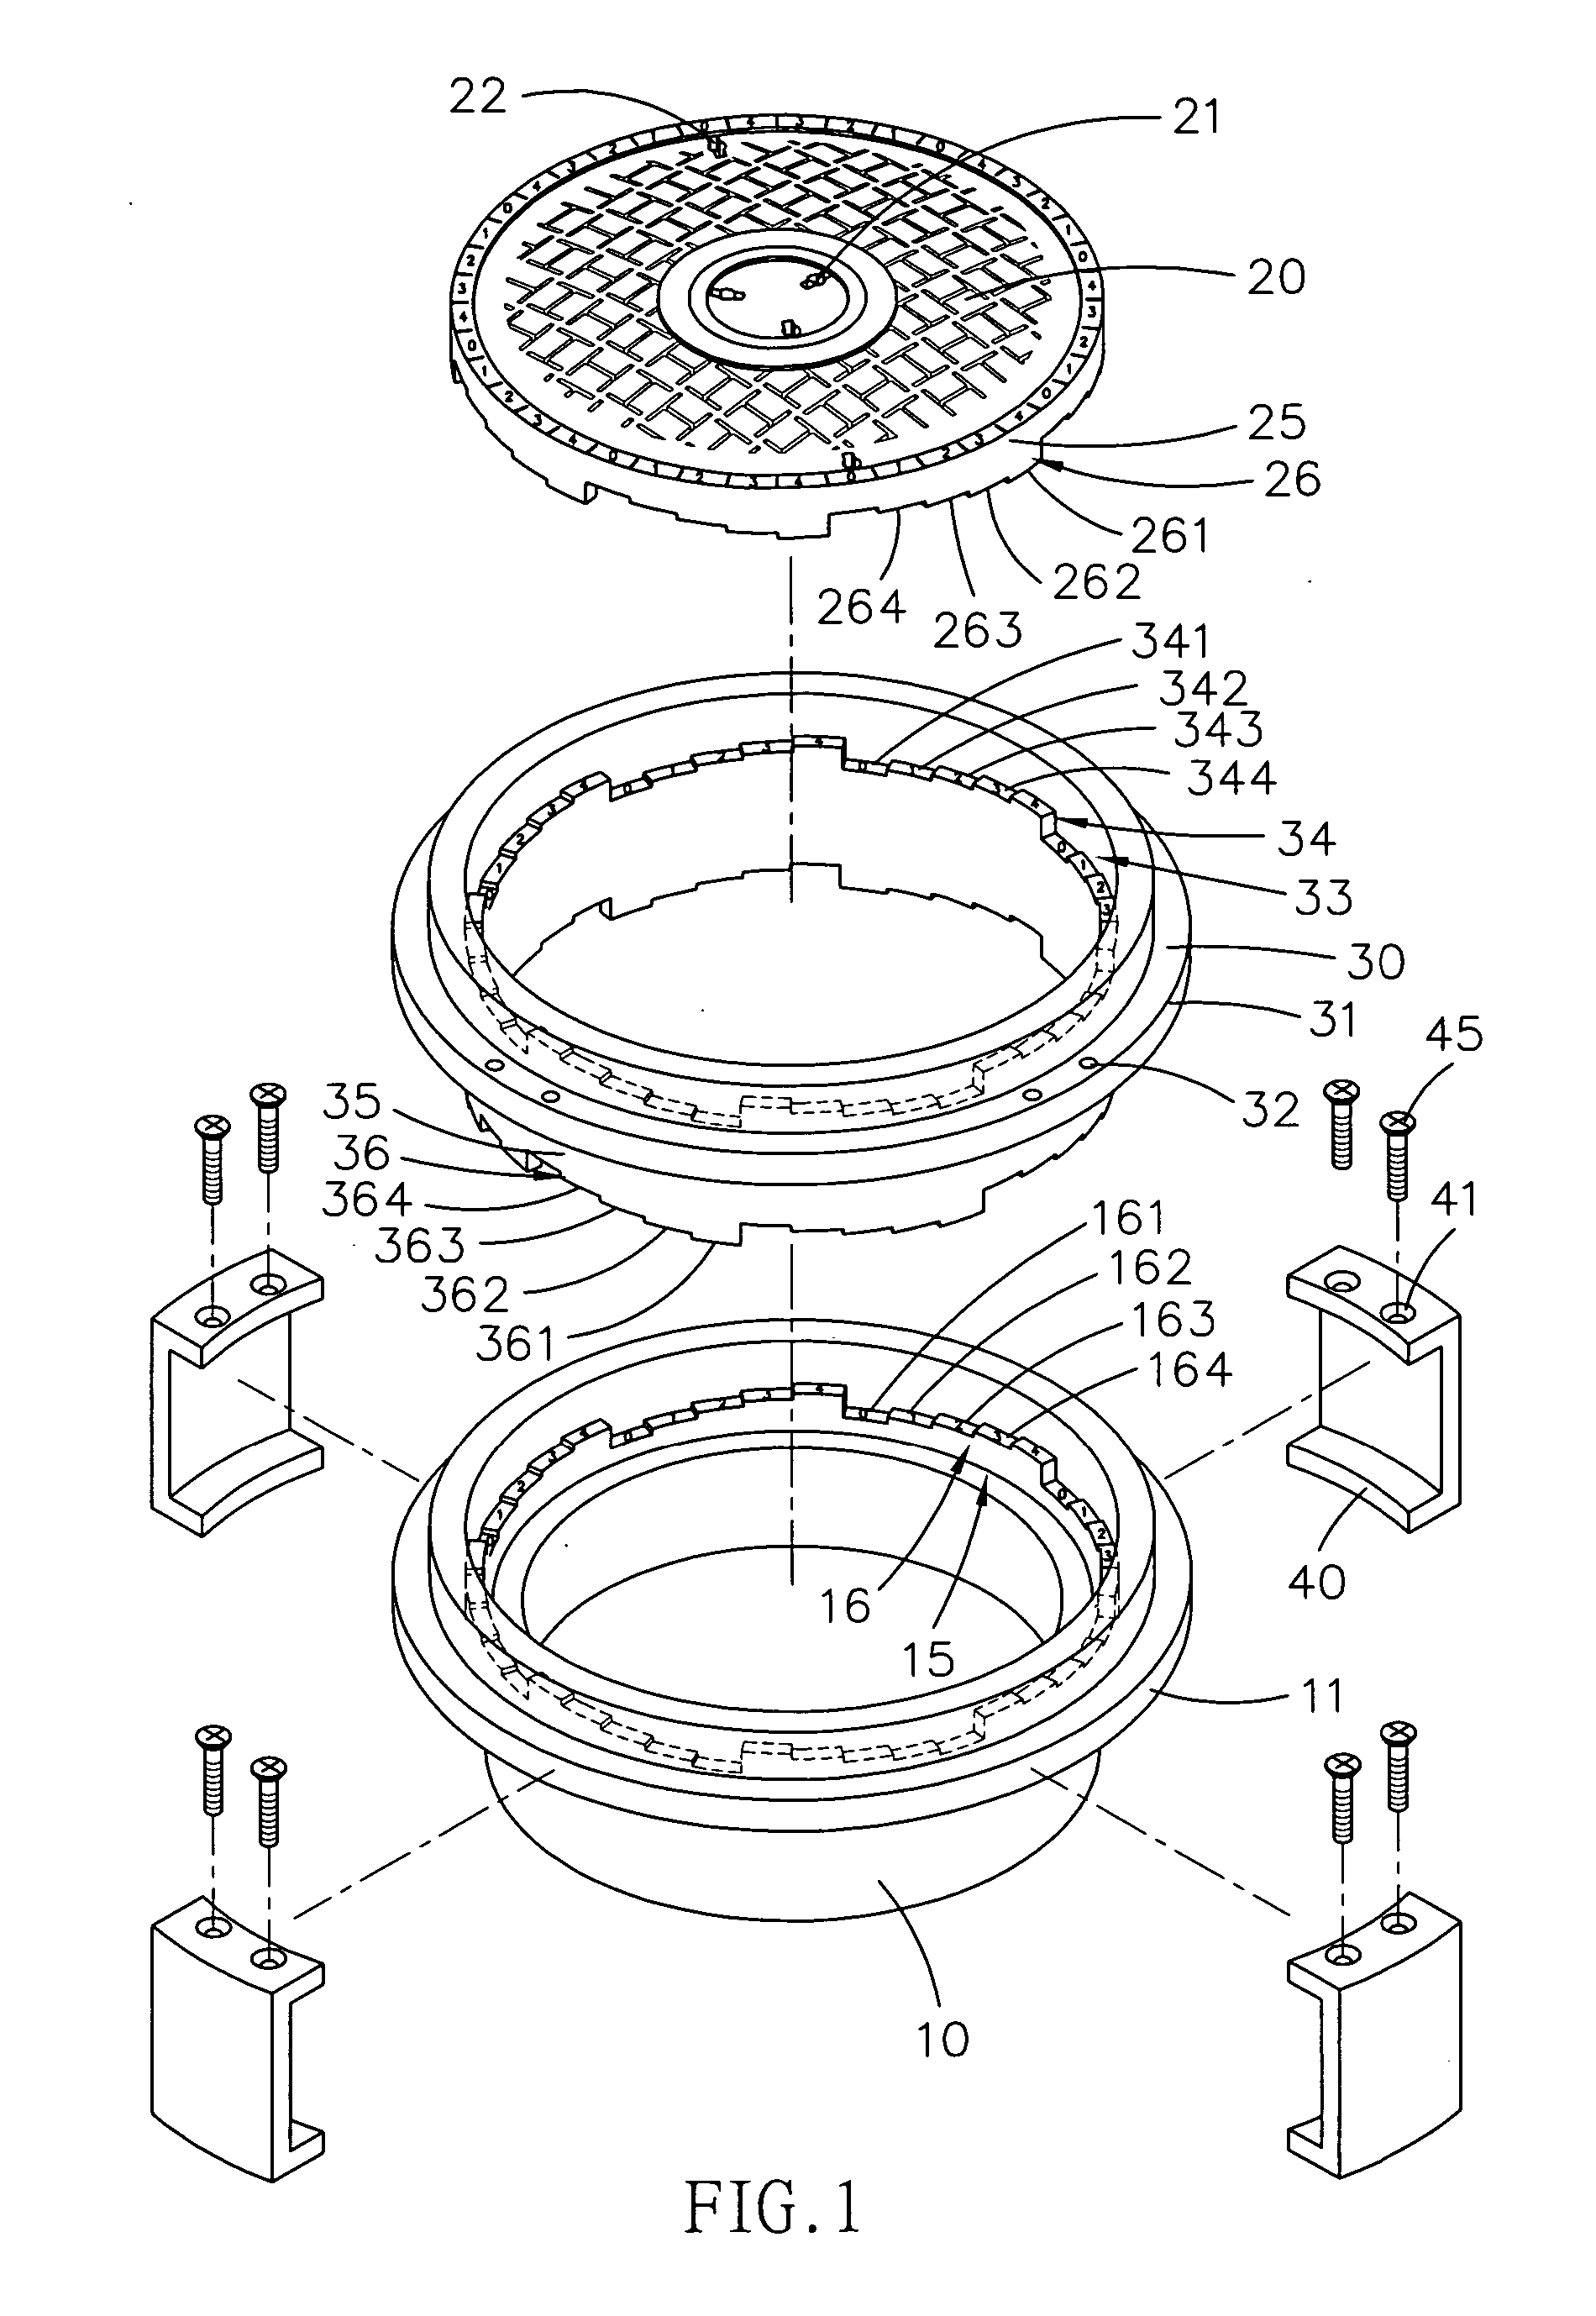 Covering apparatus for opening of underground pipeline or box